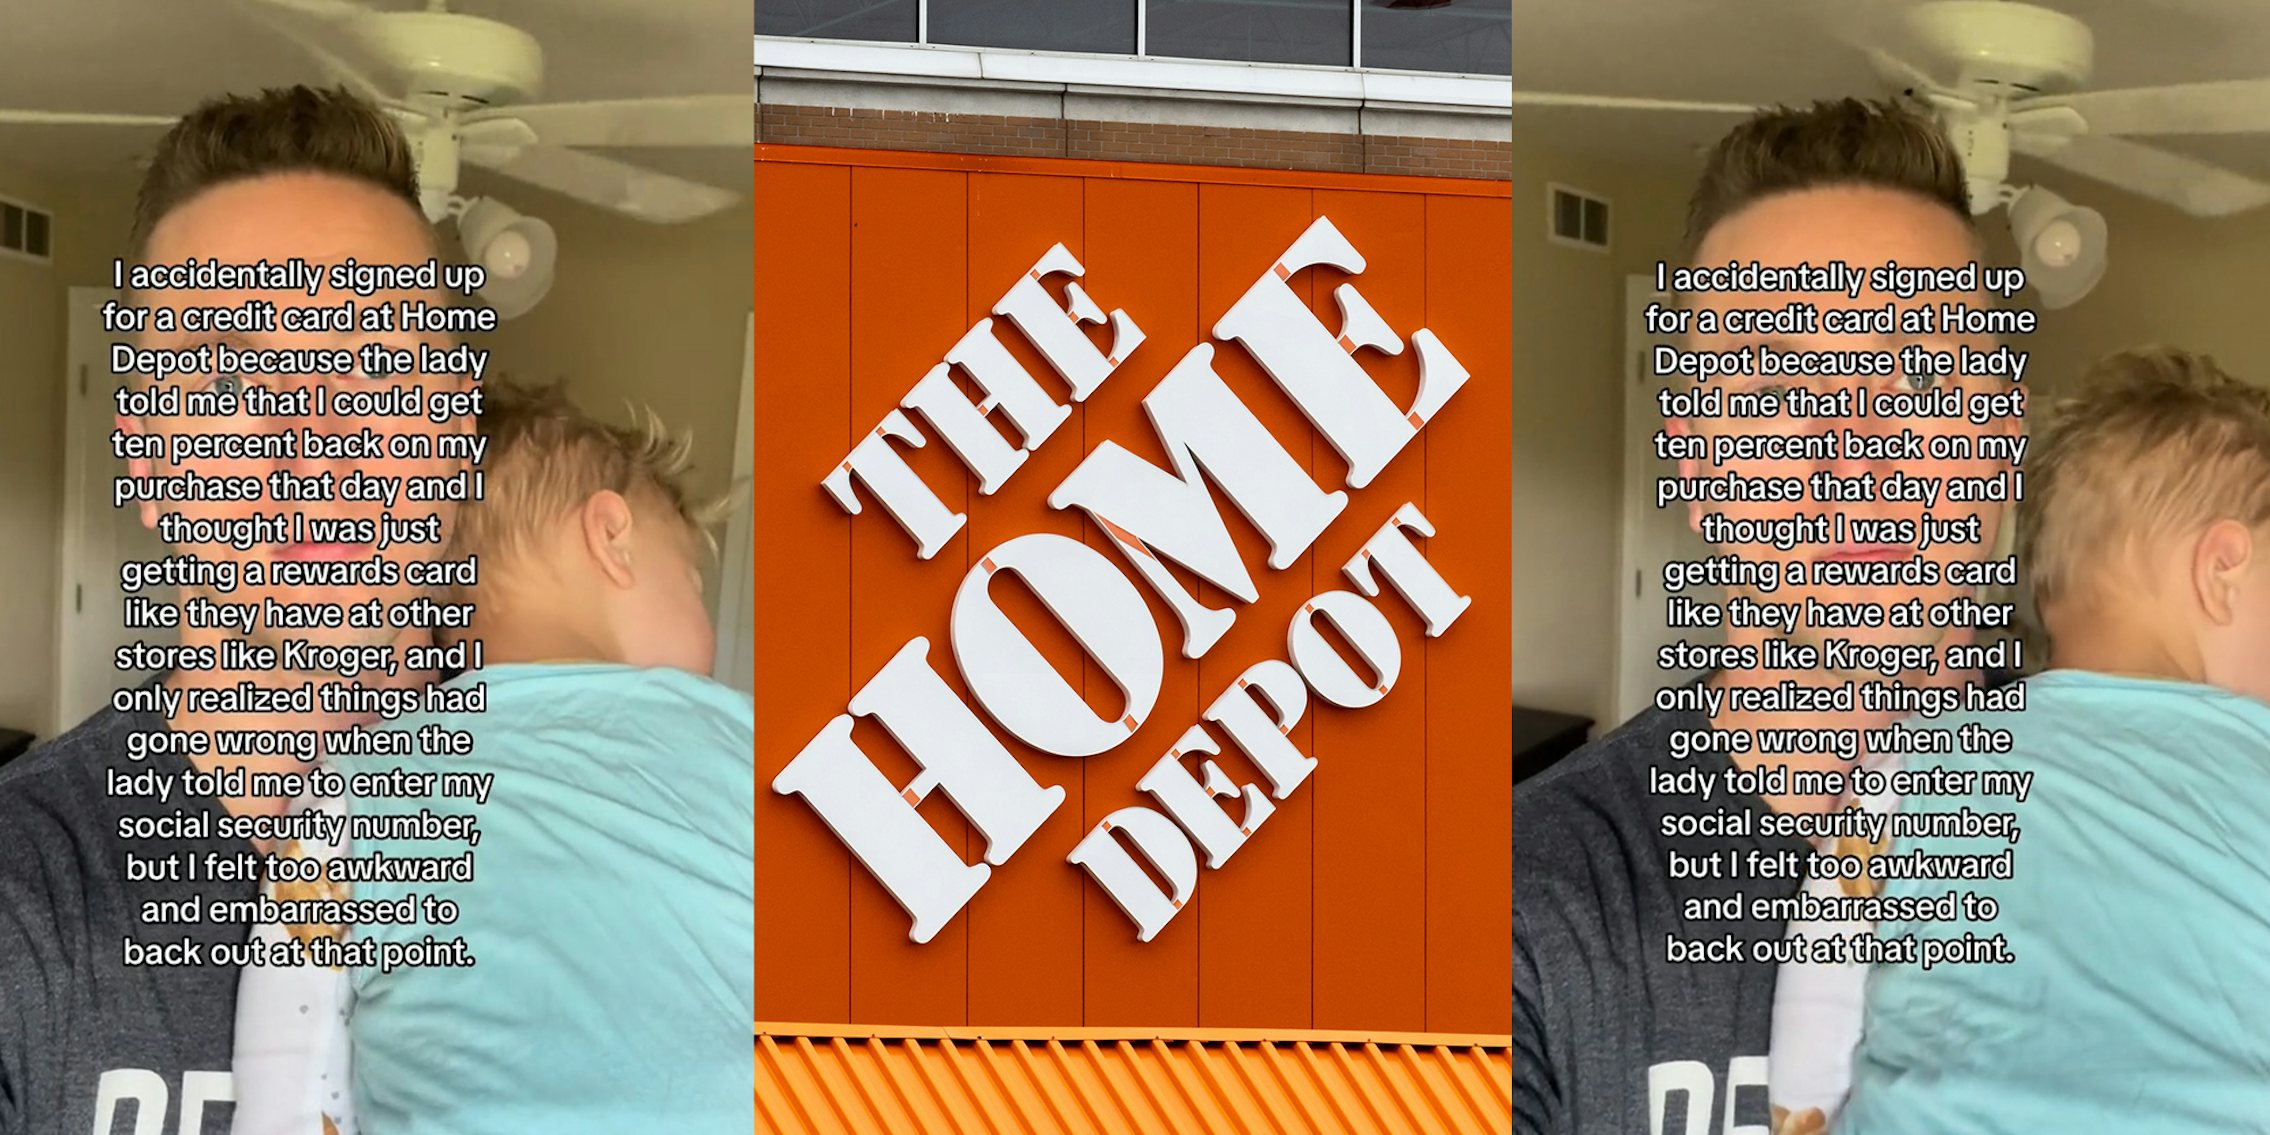 Customer Accidentally signs up for a credit card at home depot